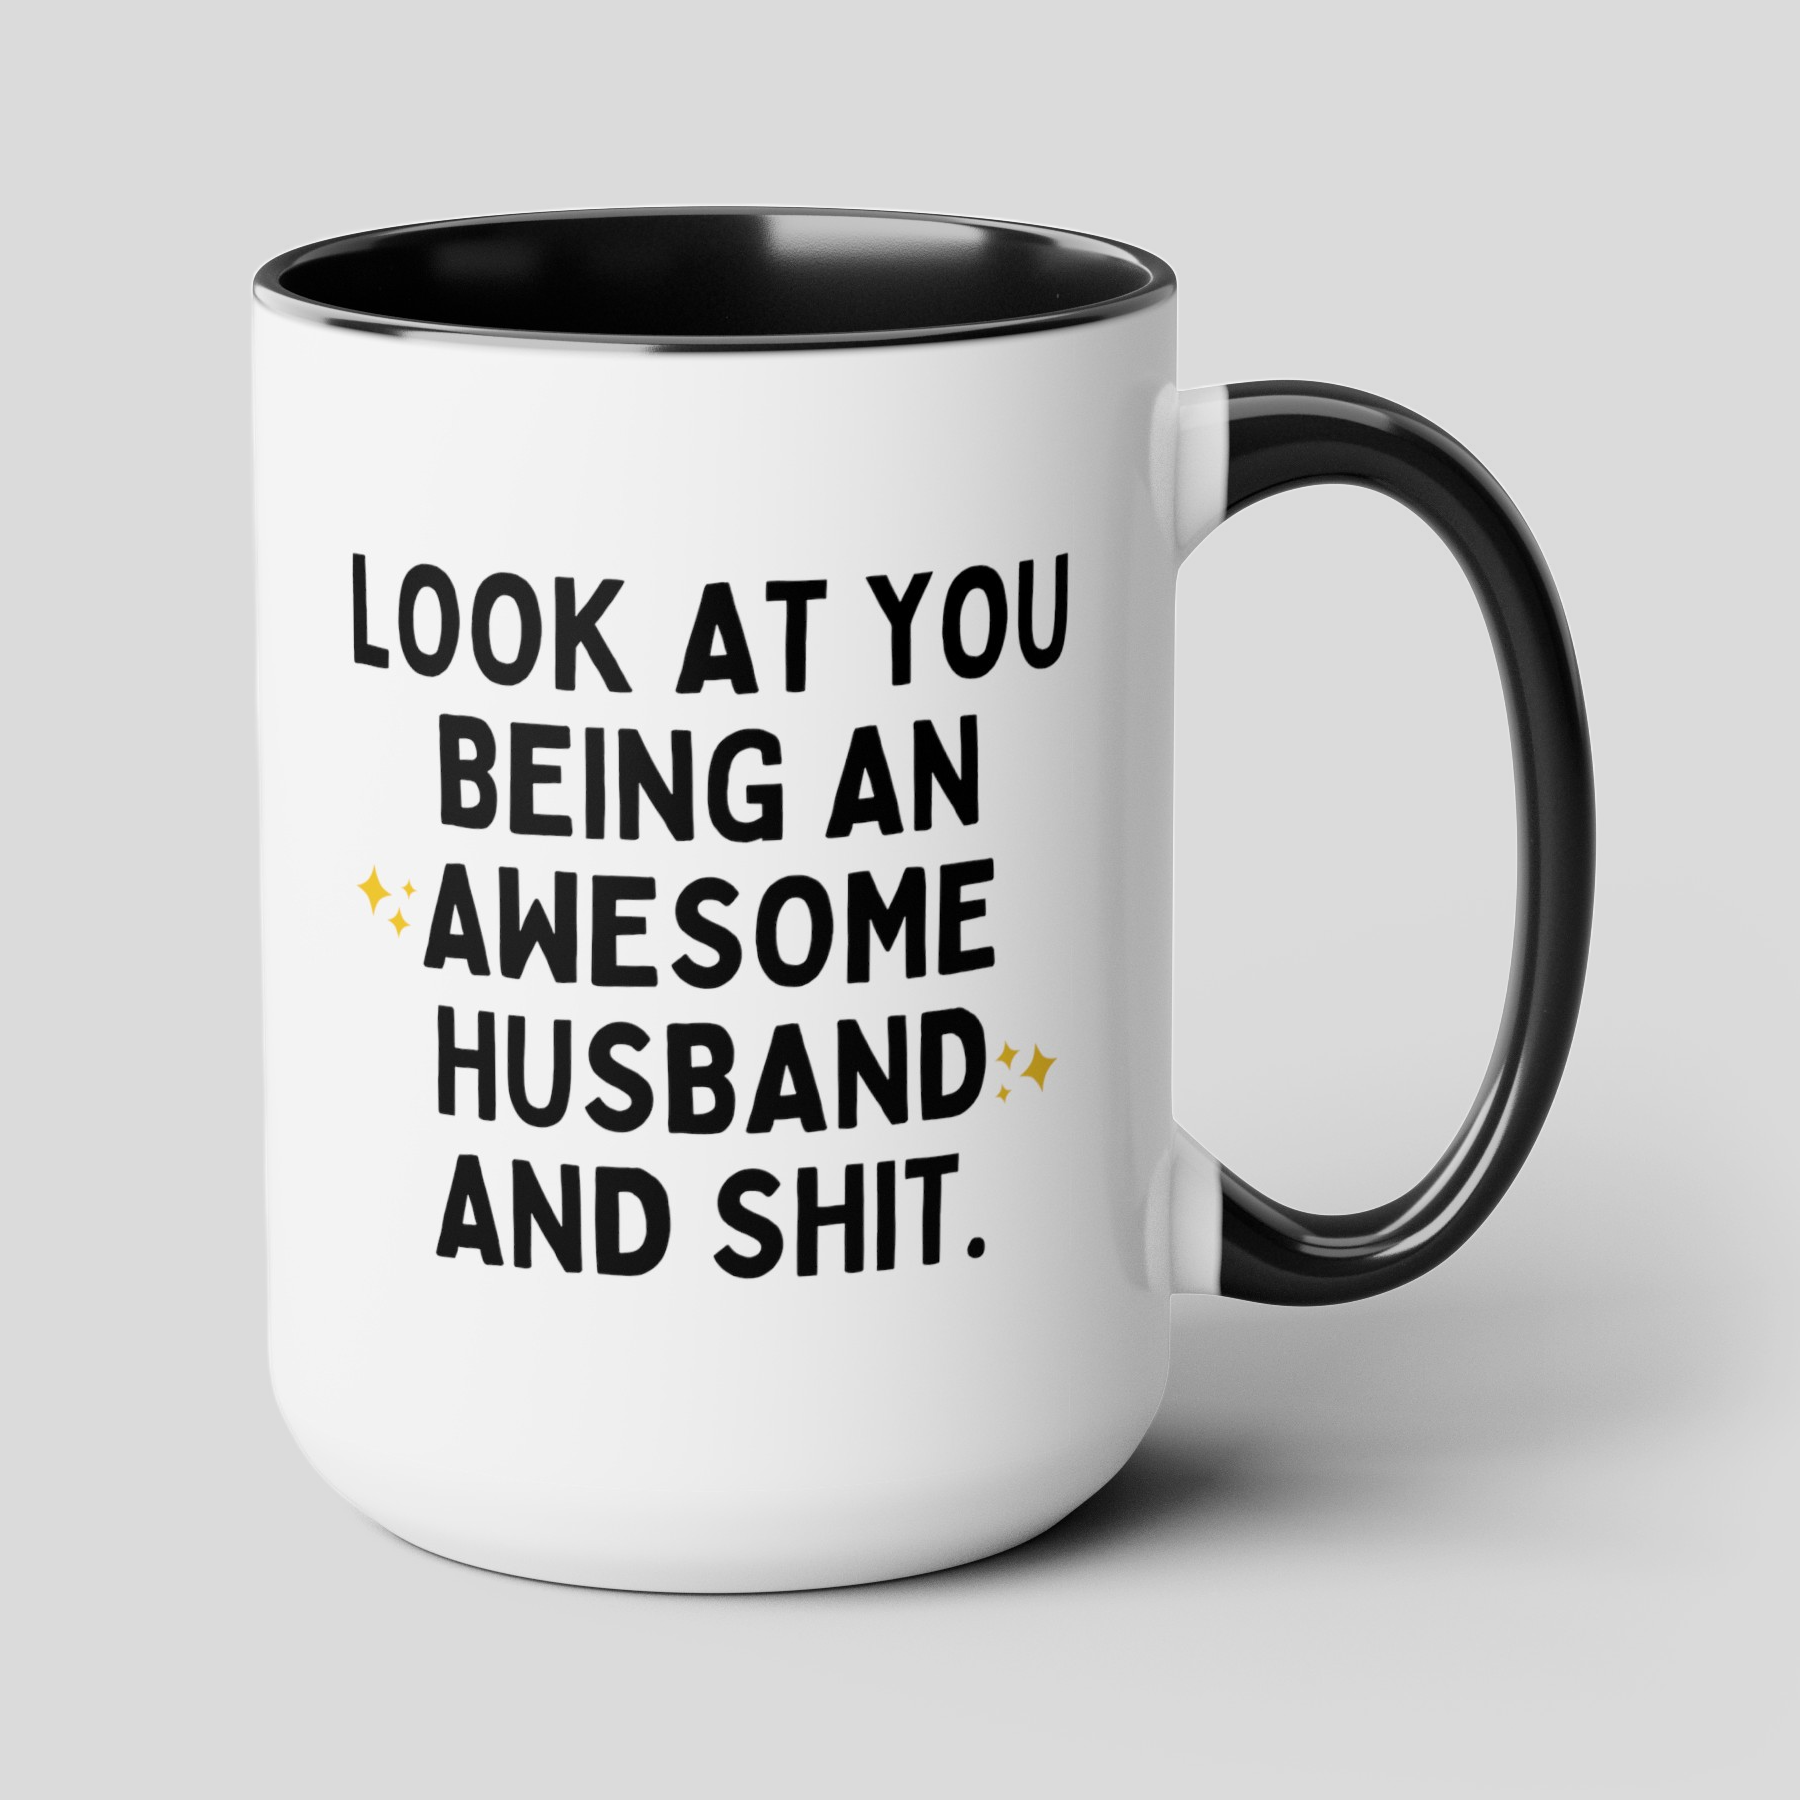 Look At You Being An Awesome Husband And Shit 15oz white with black accent funny large coffee mug gift for hubby curse joke gag idea waveywares wavey wares wavywares wavy wares cover